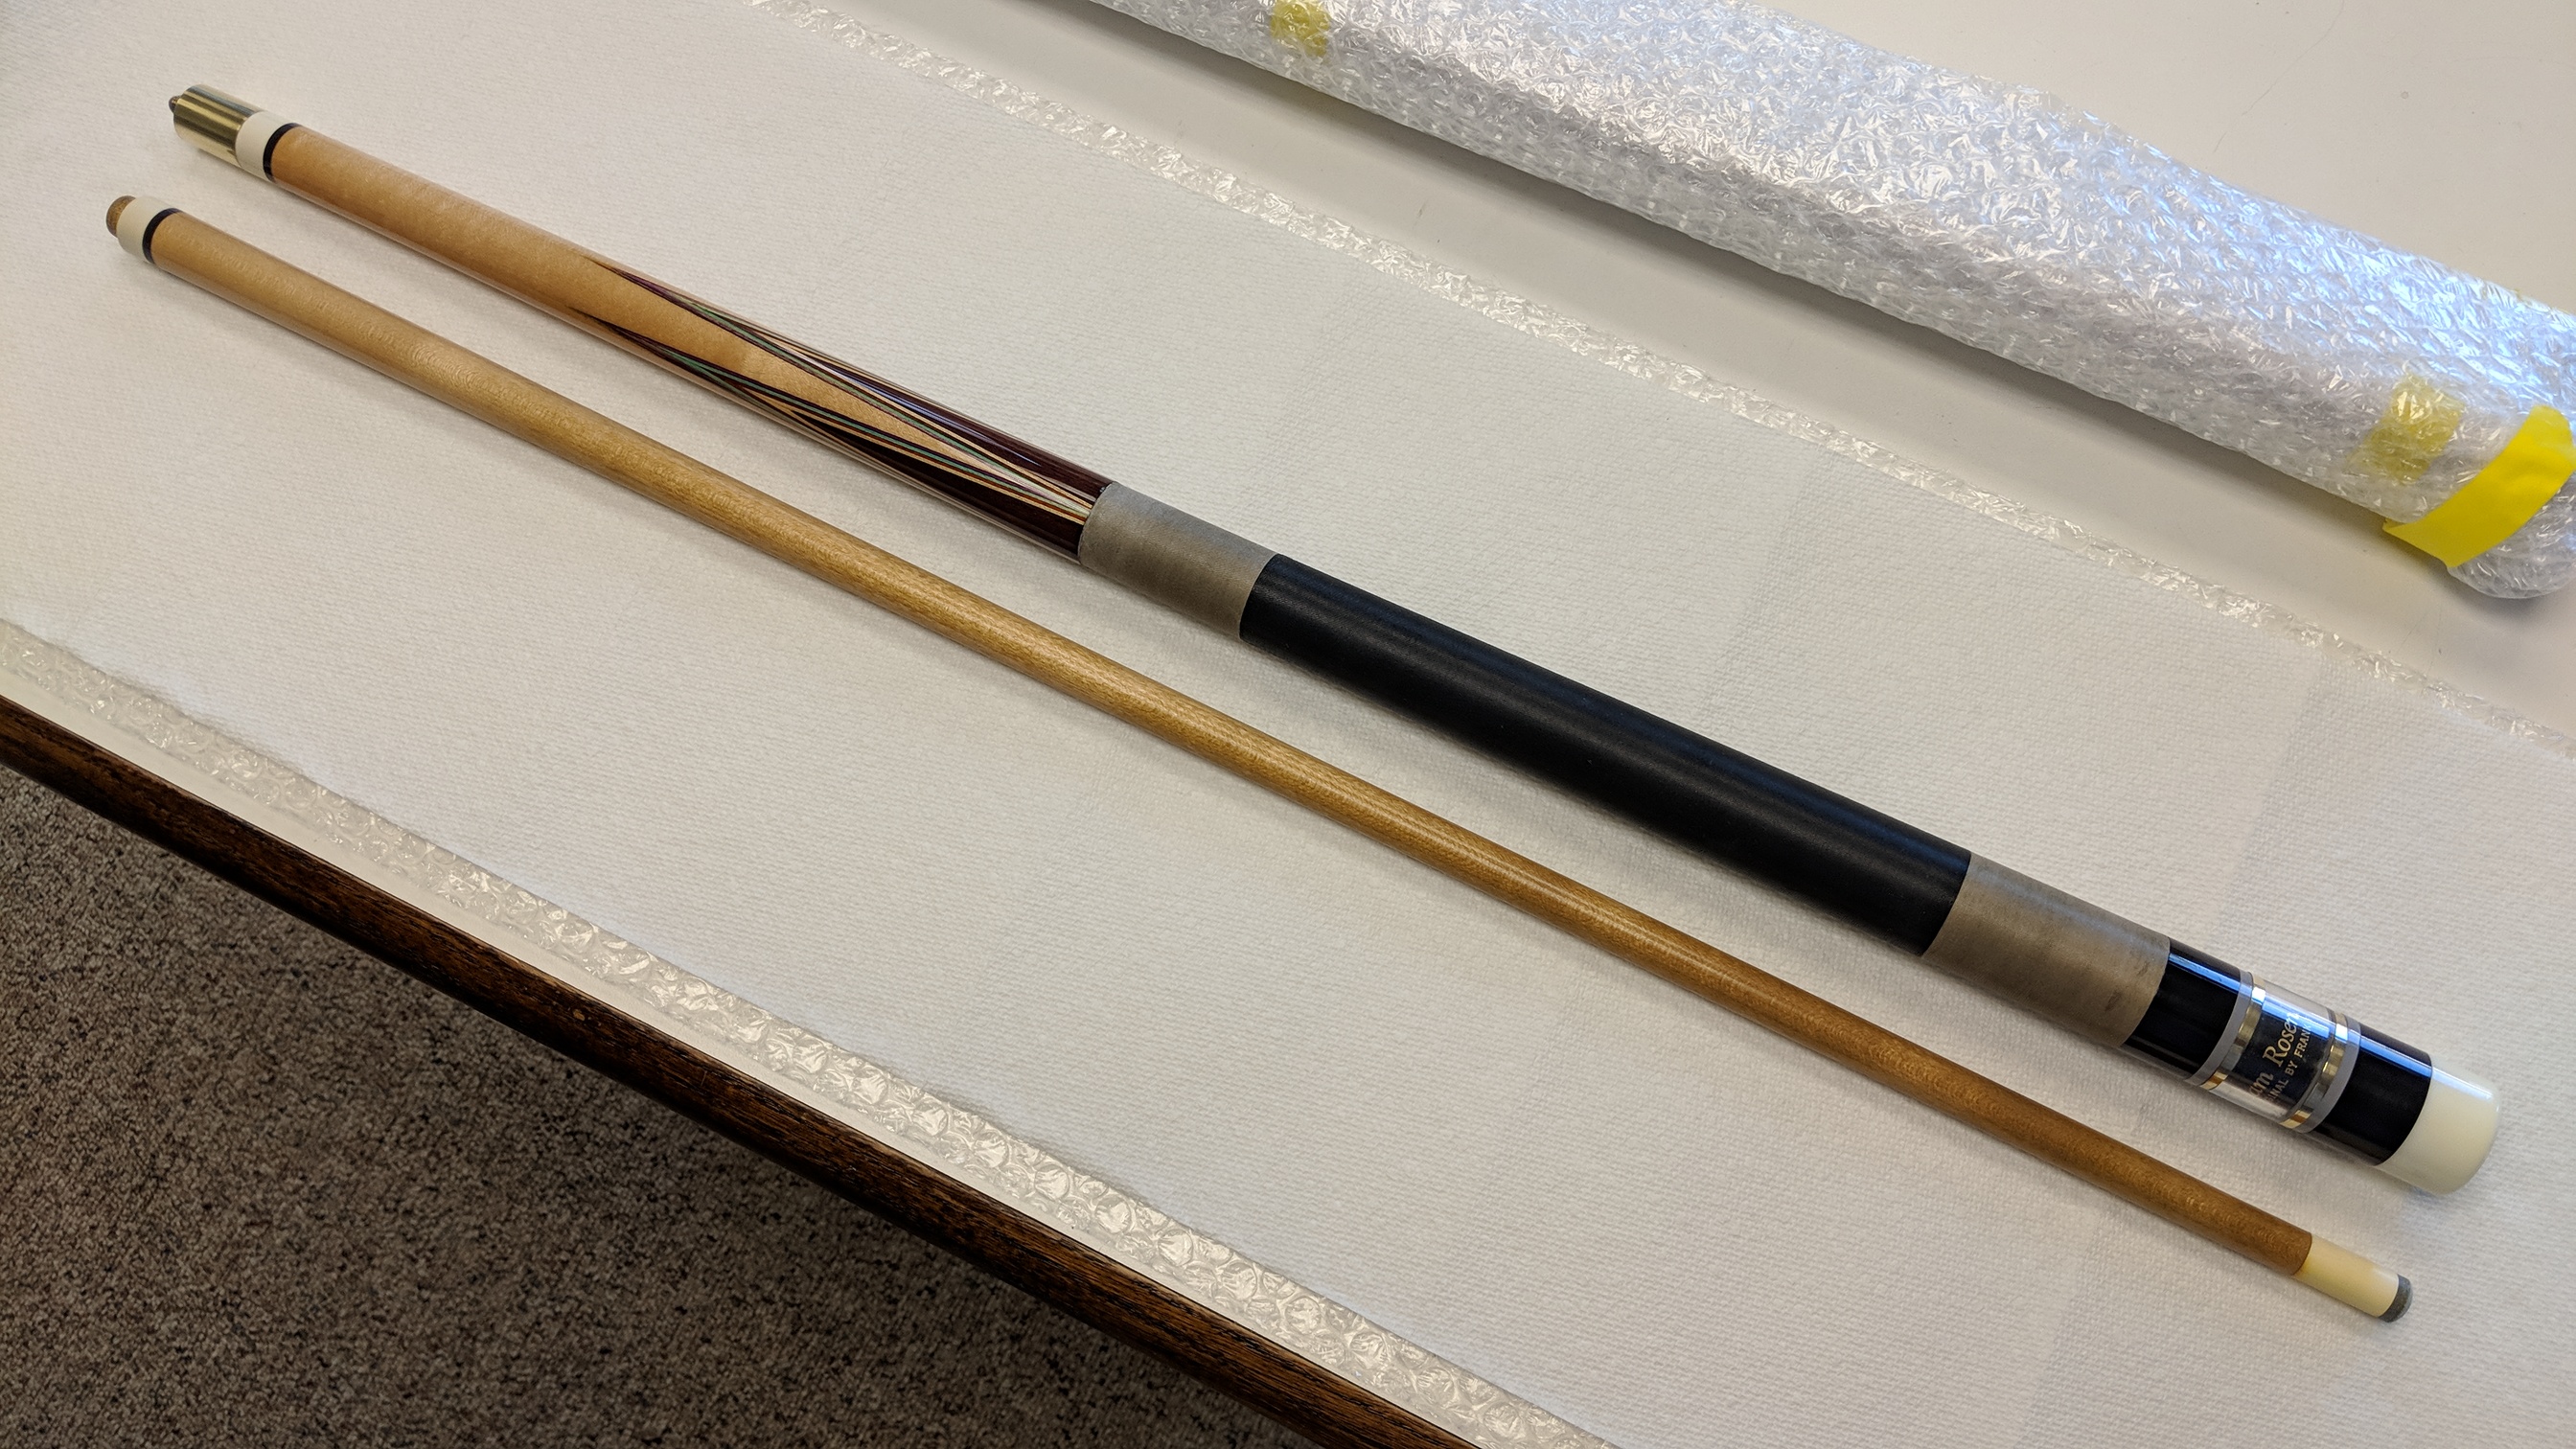 On the way back home after cue refinishing. - Proficient Billiards Cue ...